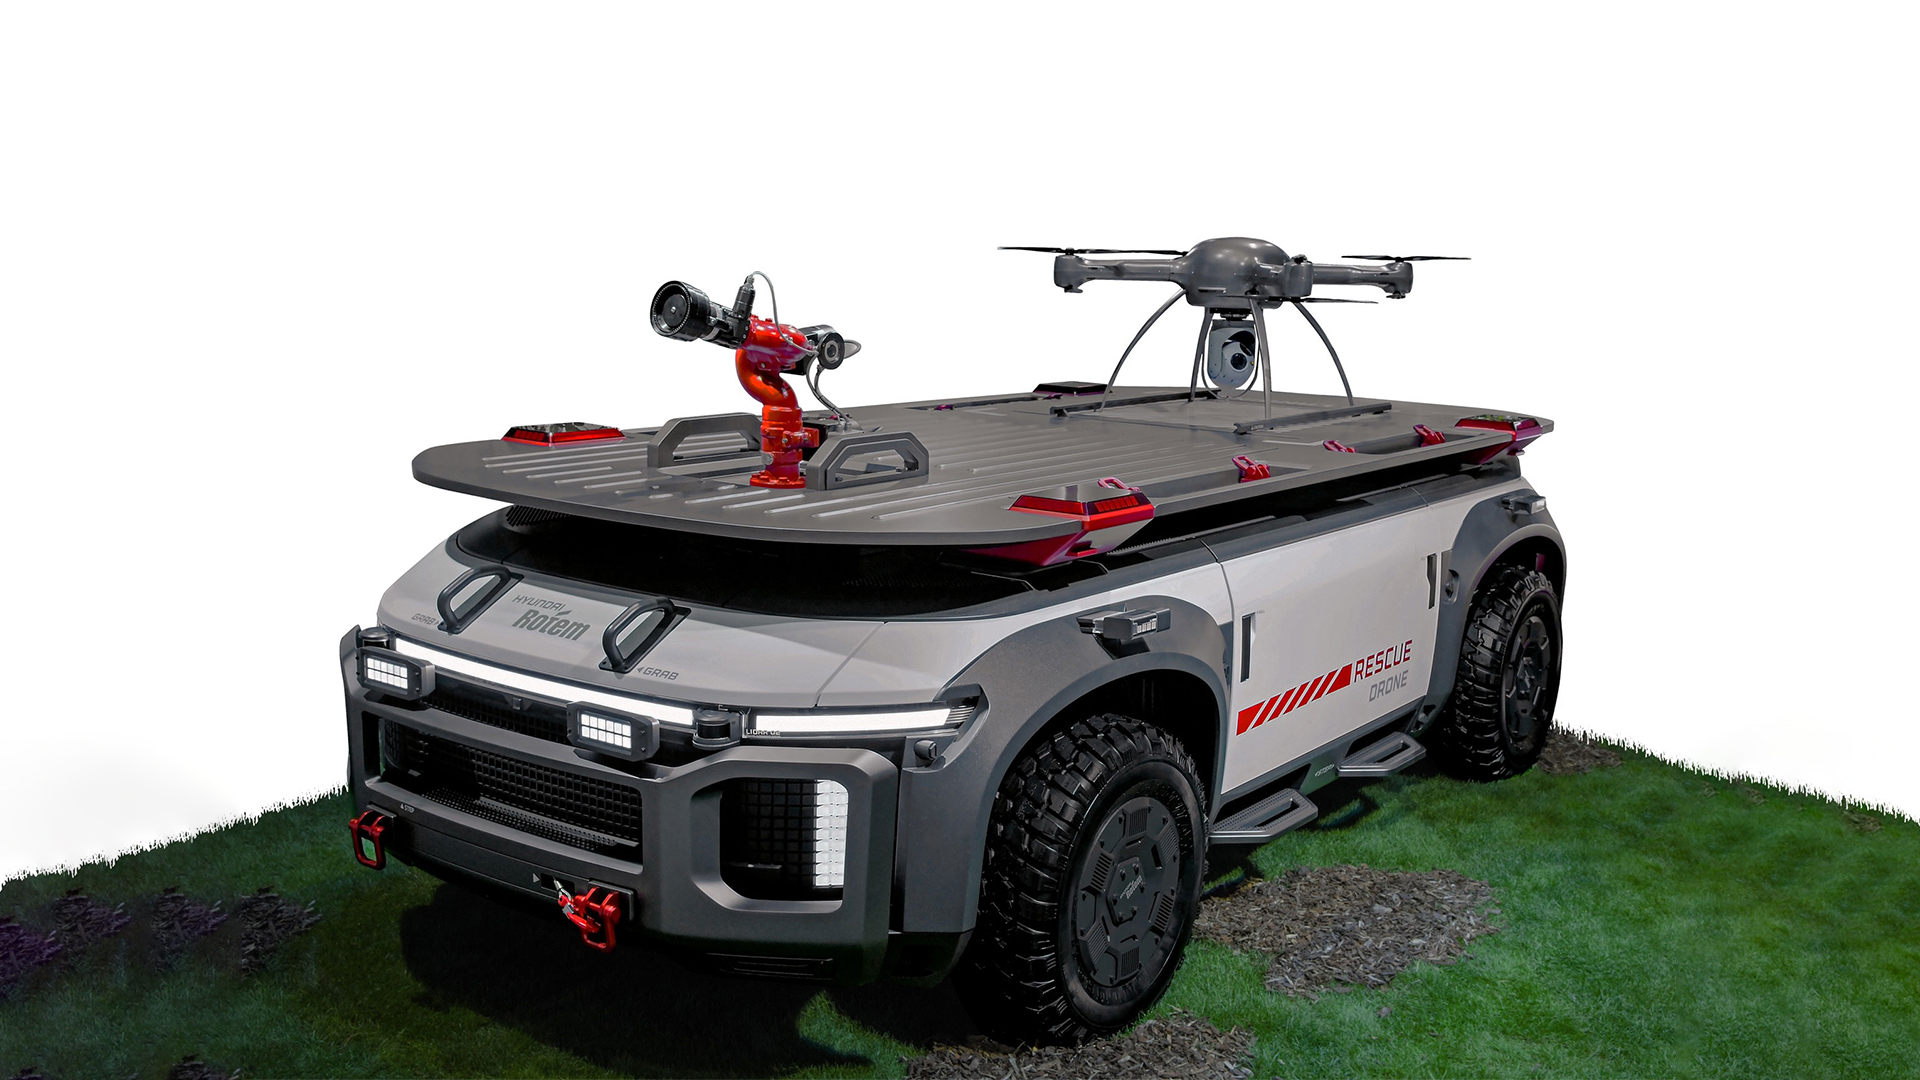 Rescue drone presented by Hyundai Motor Group at Hydrogenwave